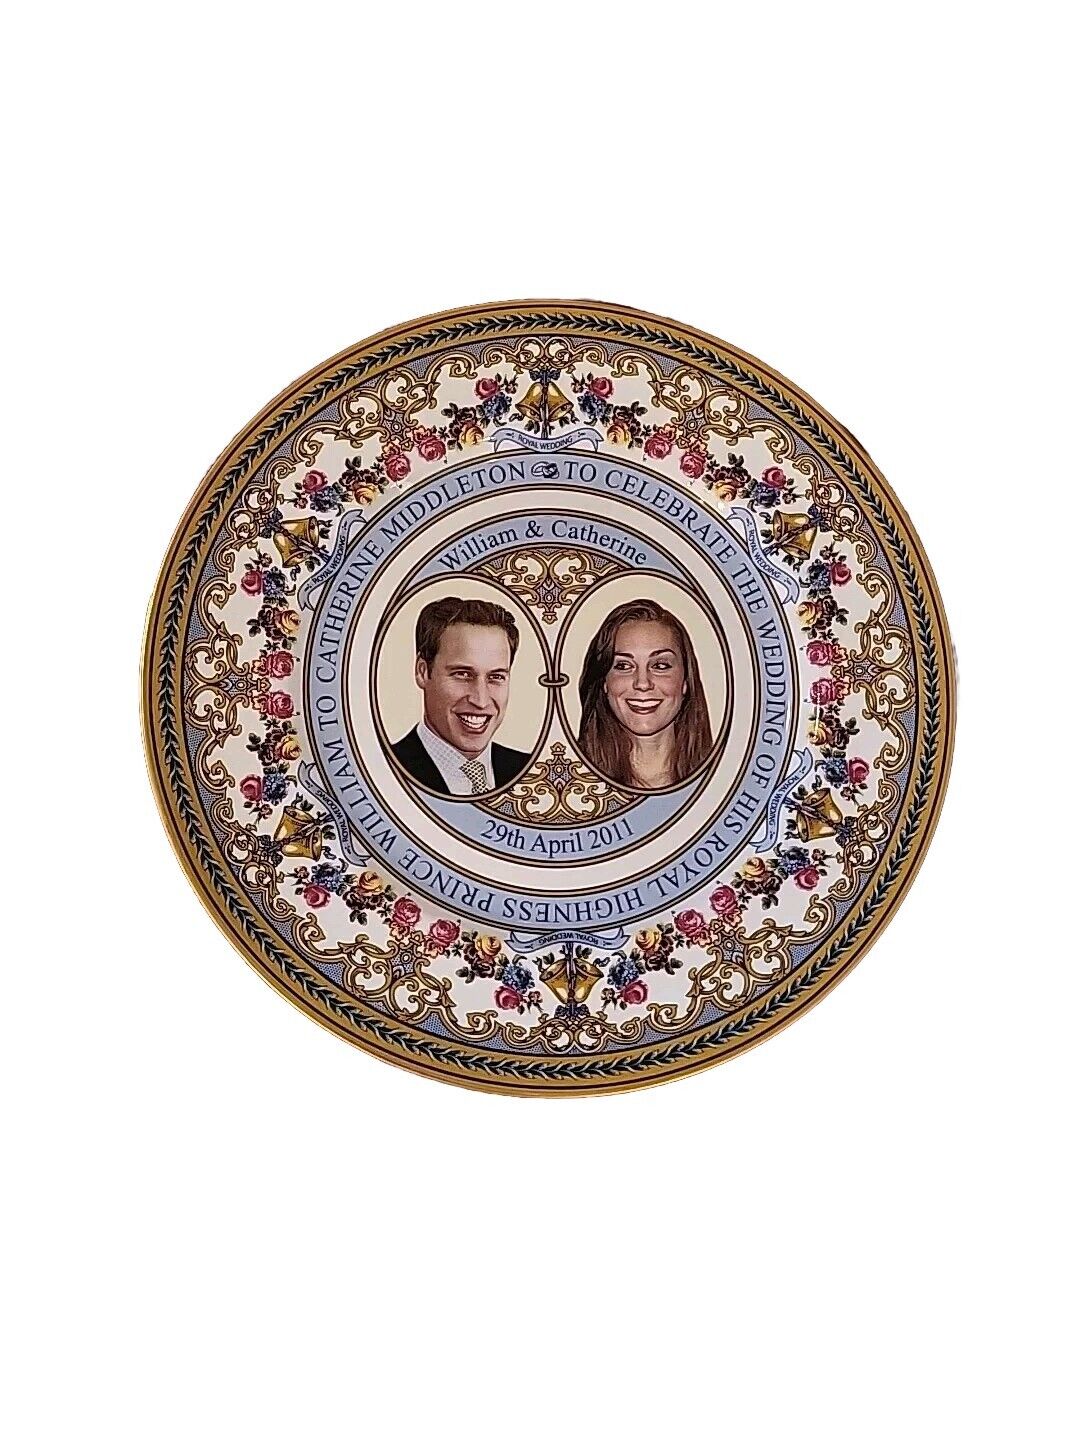 Caverswall Royal Wedding Prince William and Kate Middleton Commemorative Plate